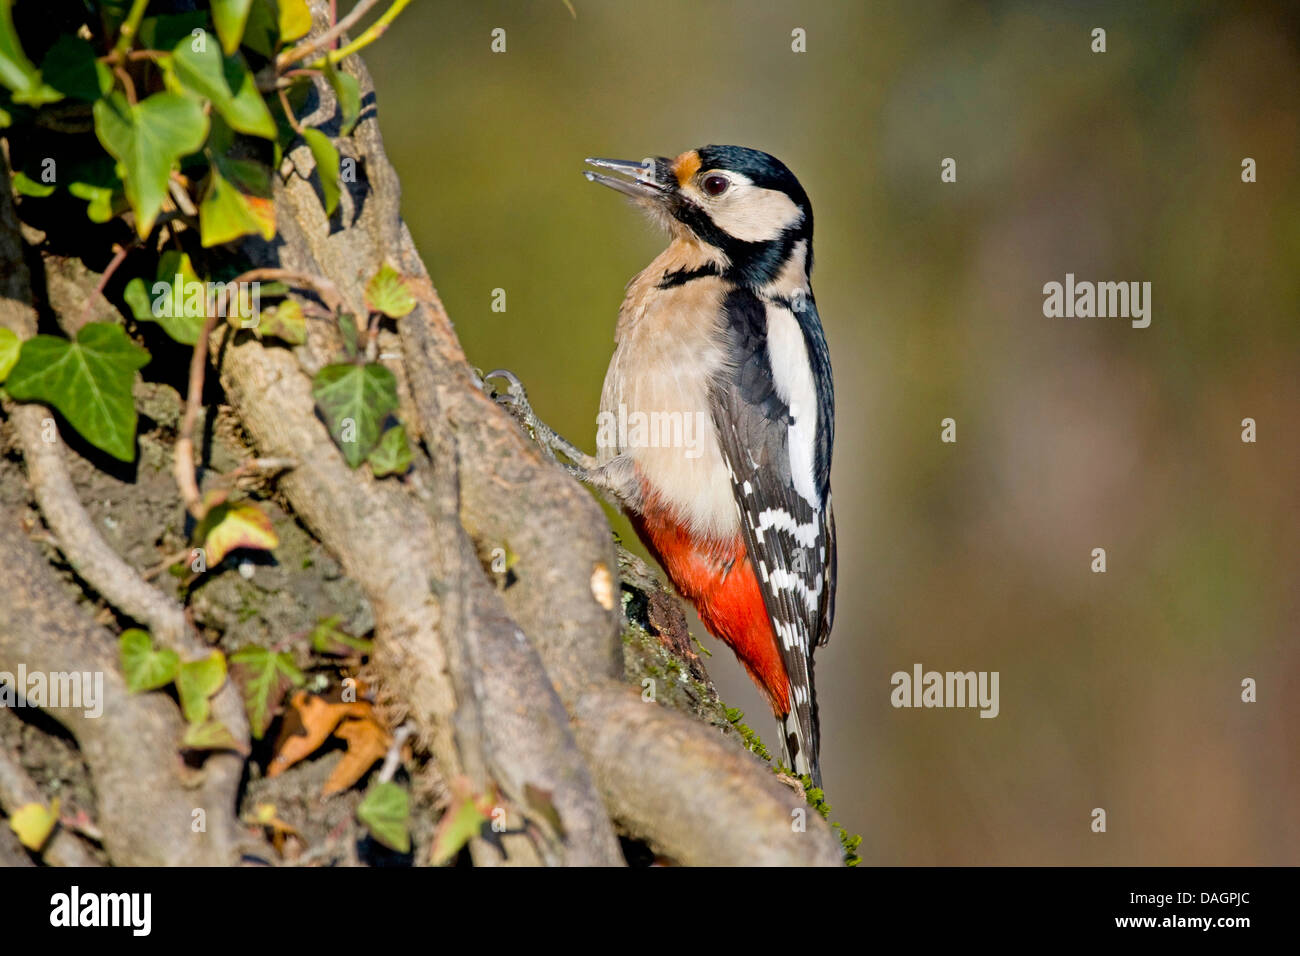 Great spotted woodpecker (Picoides major, Dendrocopos major), at tree trunk, Germany Stock Photo